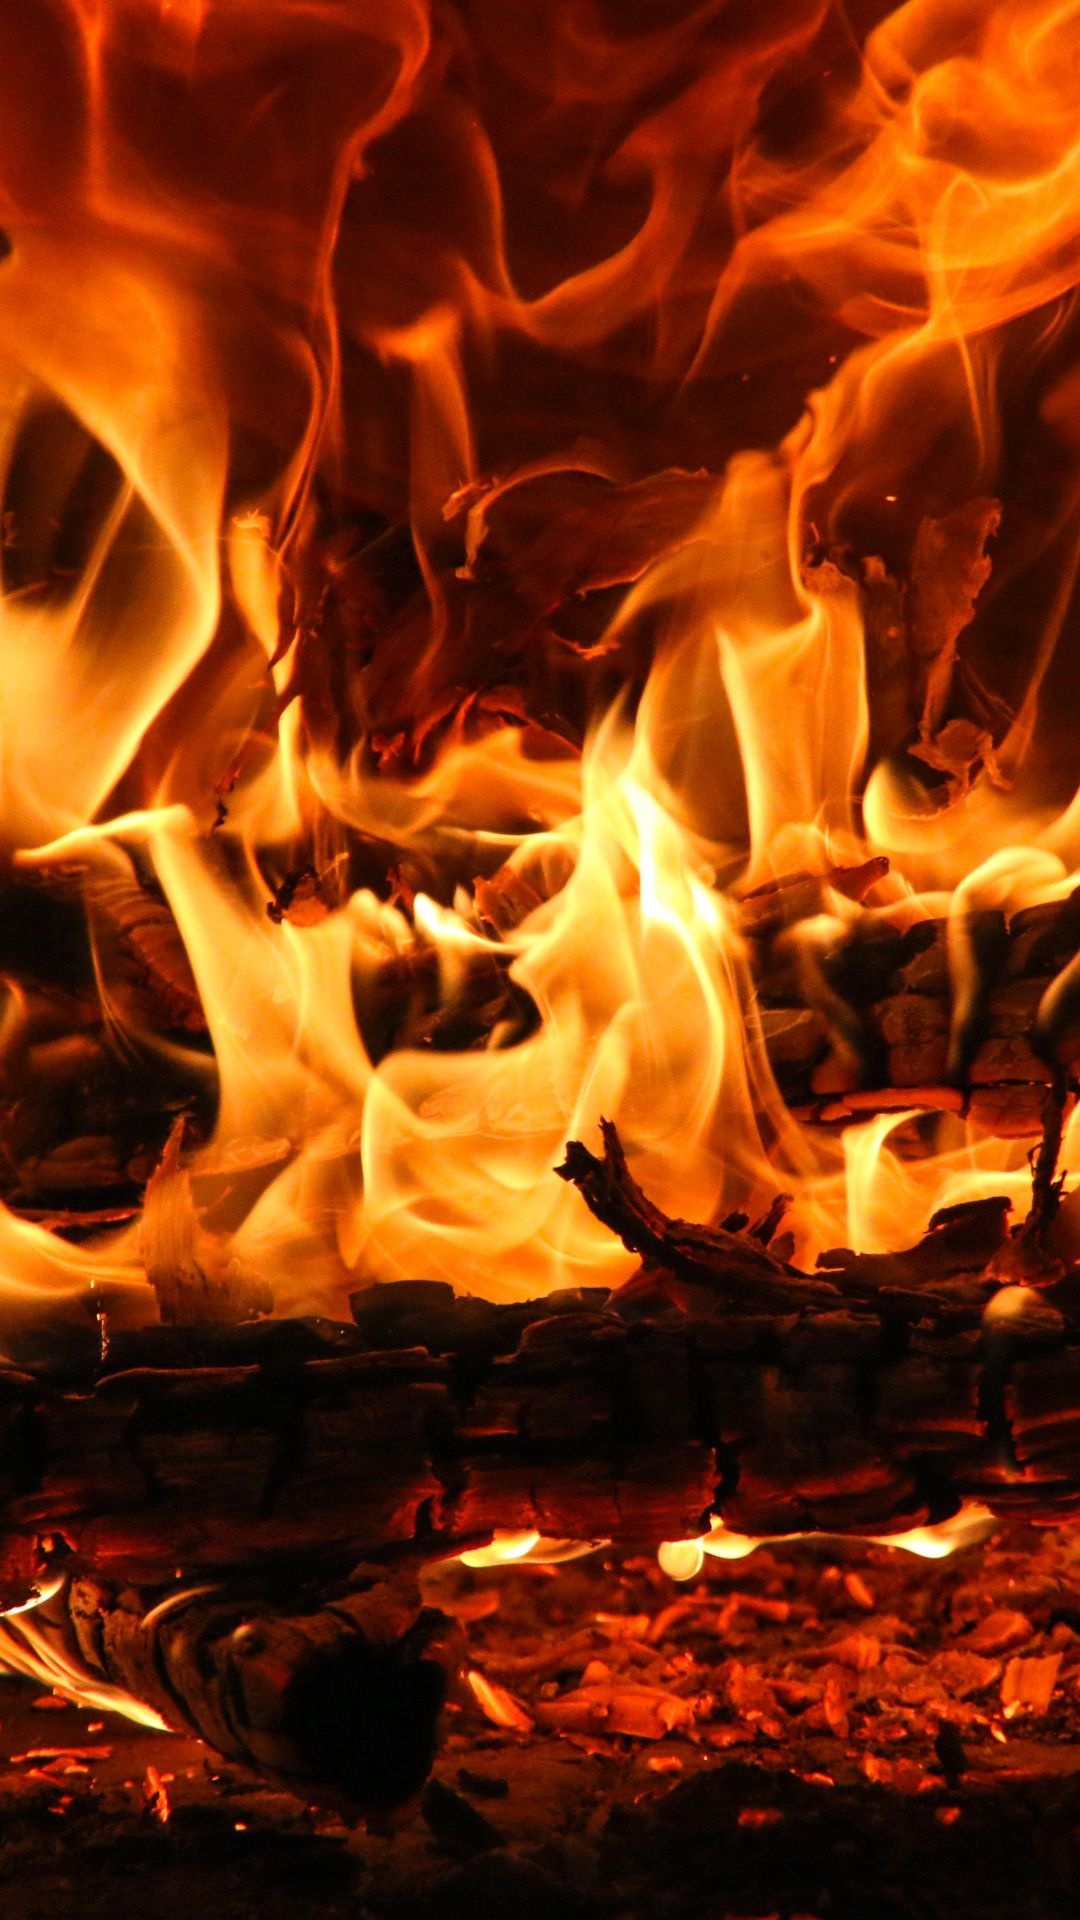 Fireplace: Flame, A hot glowing body of ignited gas, Light. 1080x1920 Full HD Background.